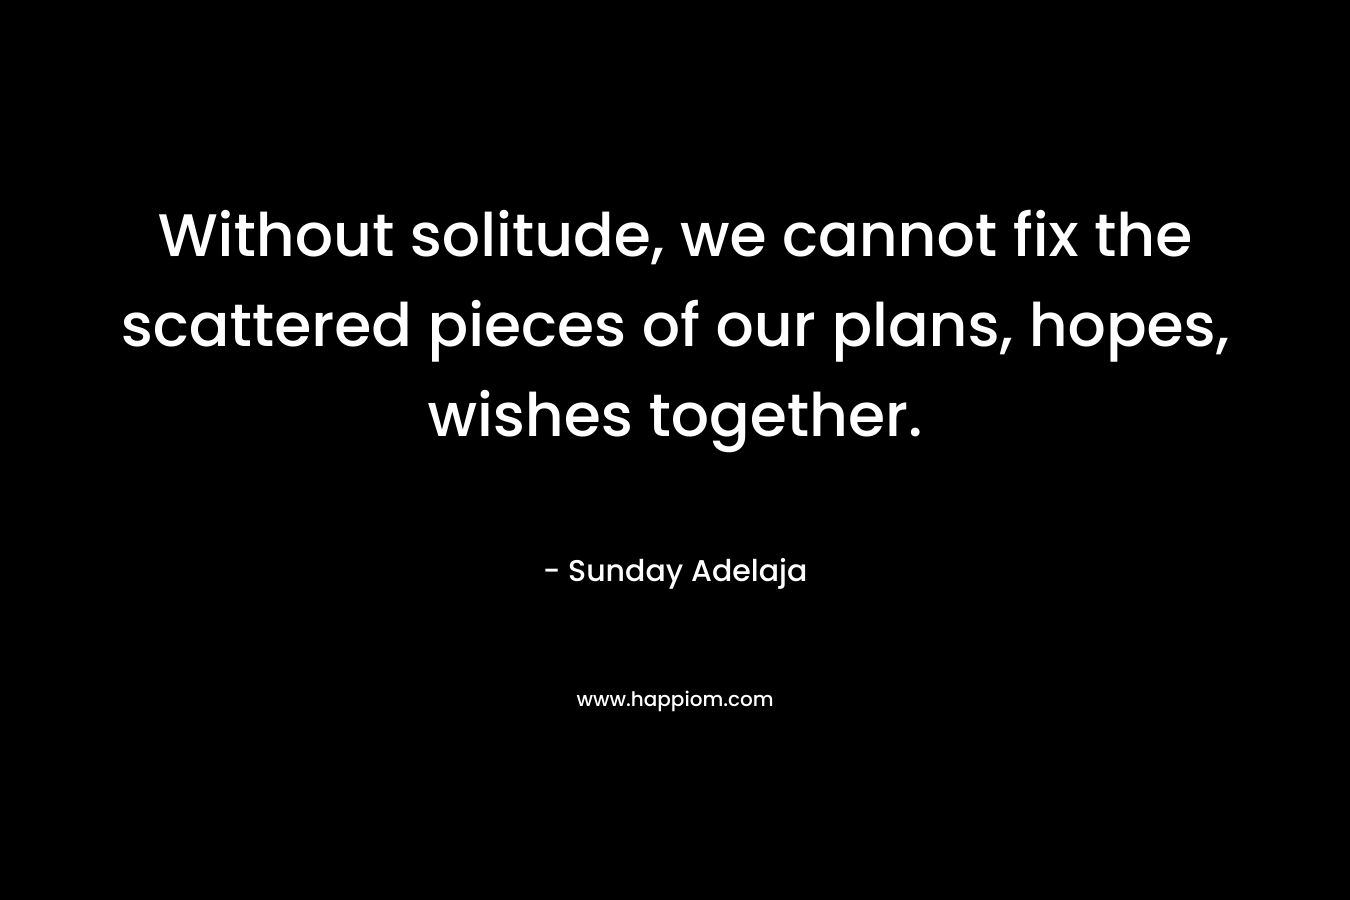 Without solitude, we cannot fix the scattered pieces of our plans, hopes, wishes together.